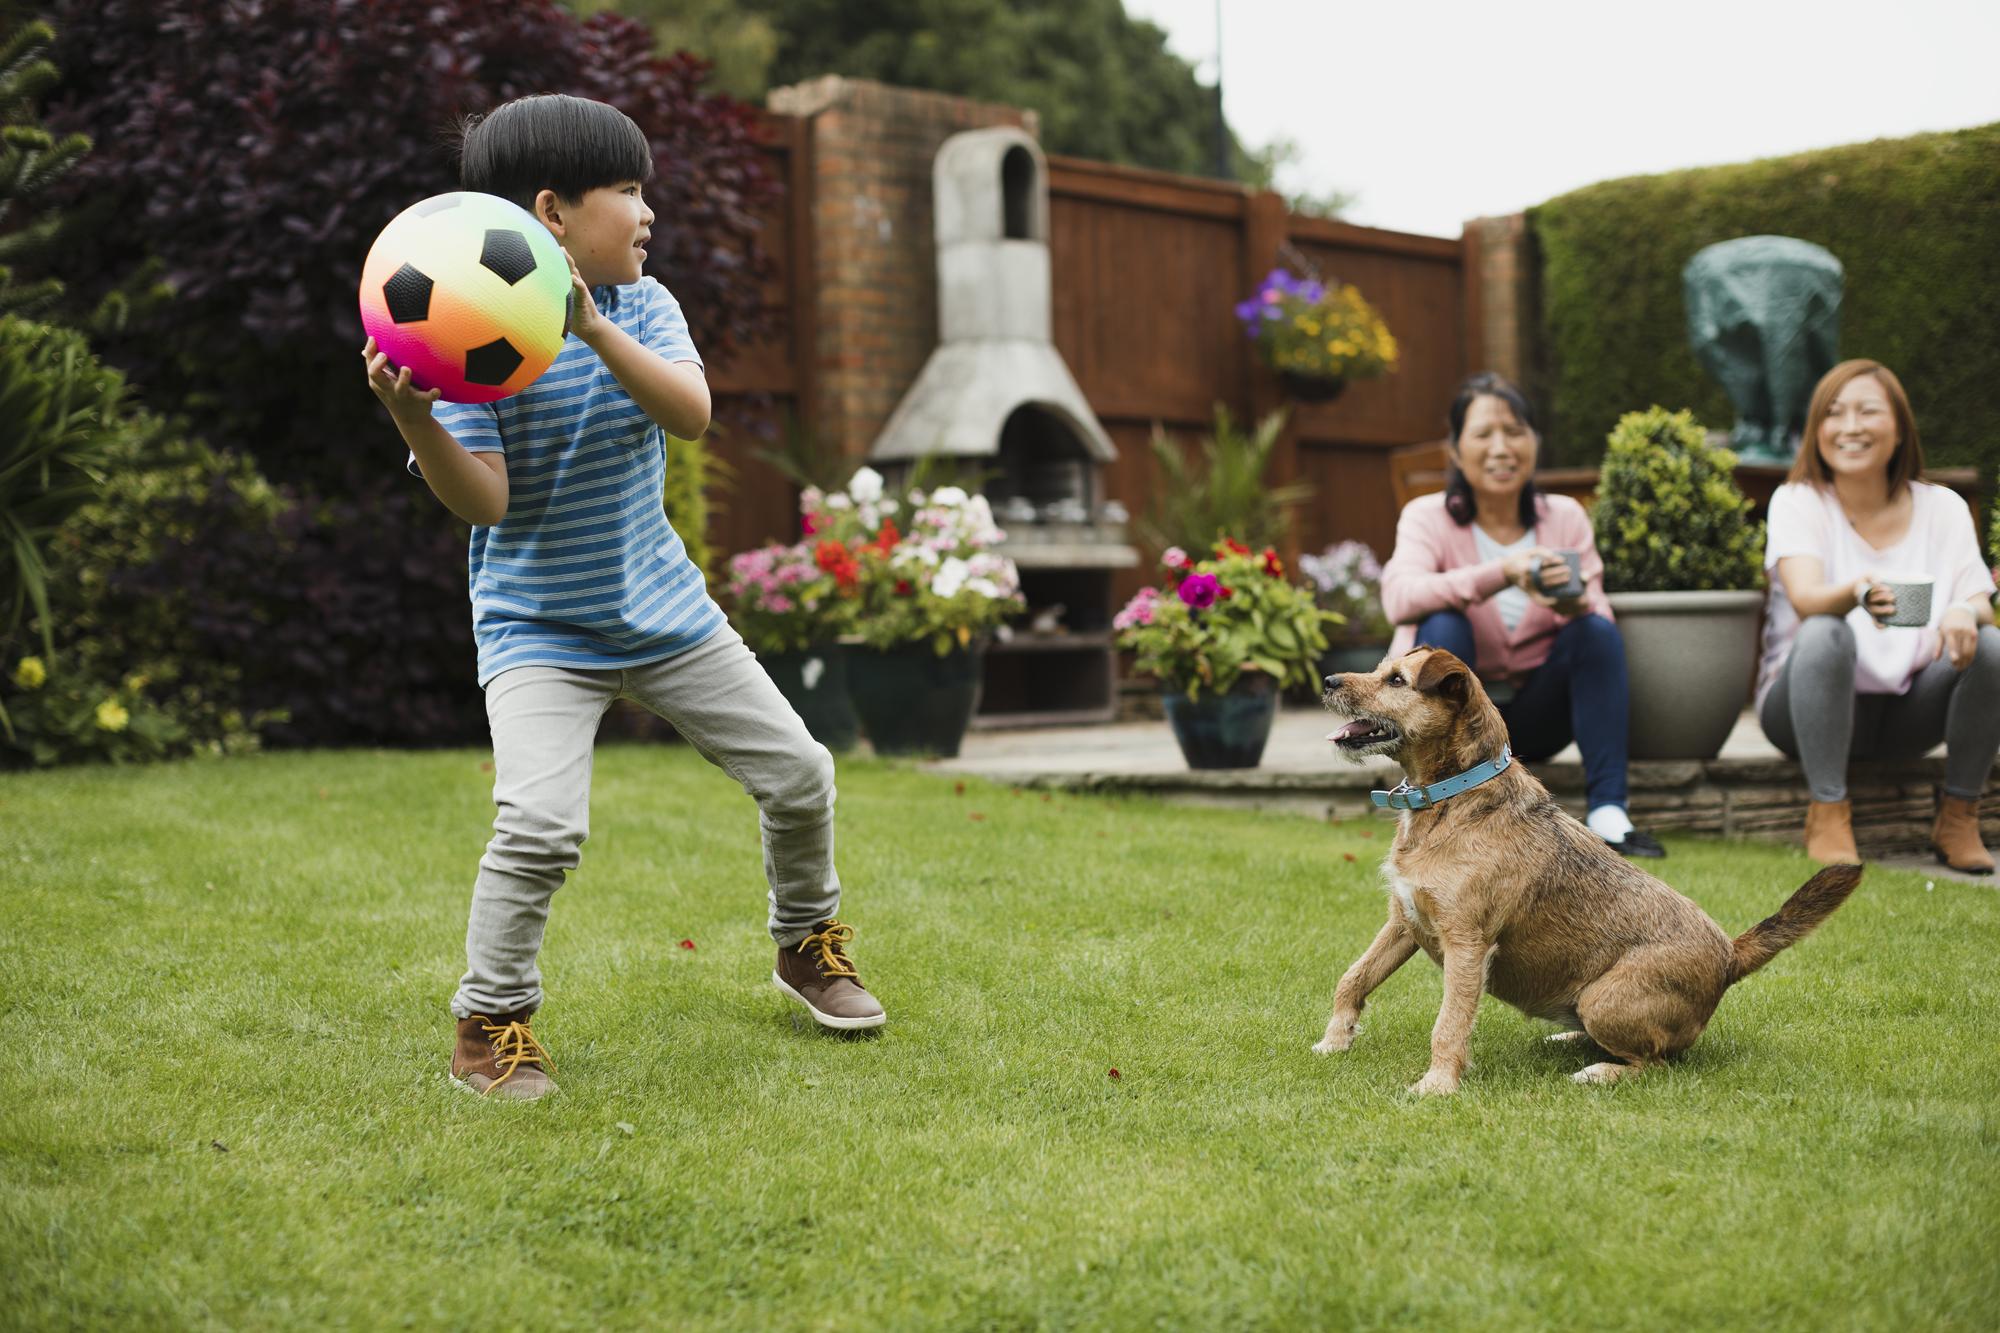 Lawn Care Columbia MO | Young Boy Playing Ball With Dog